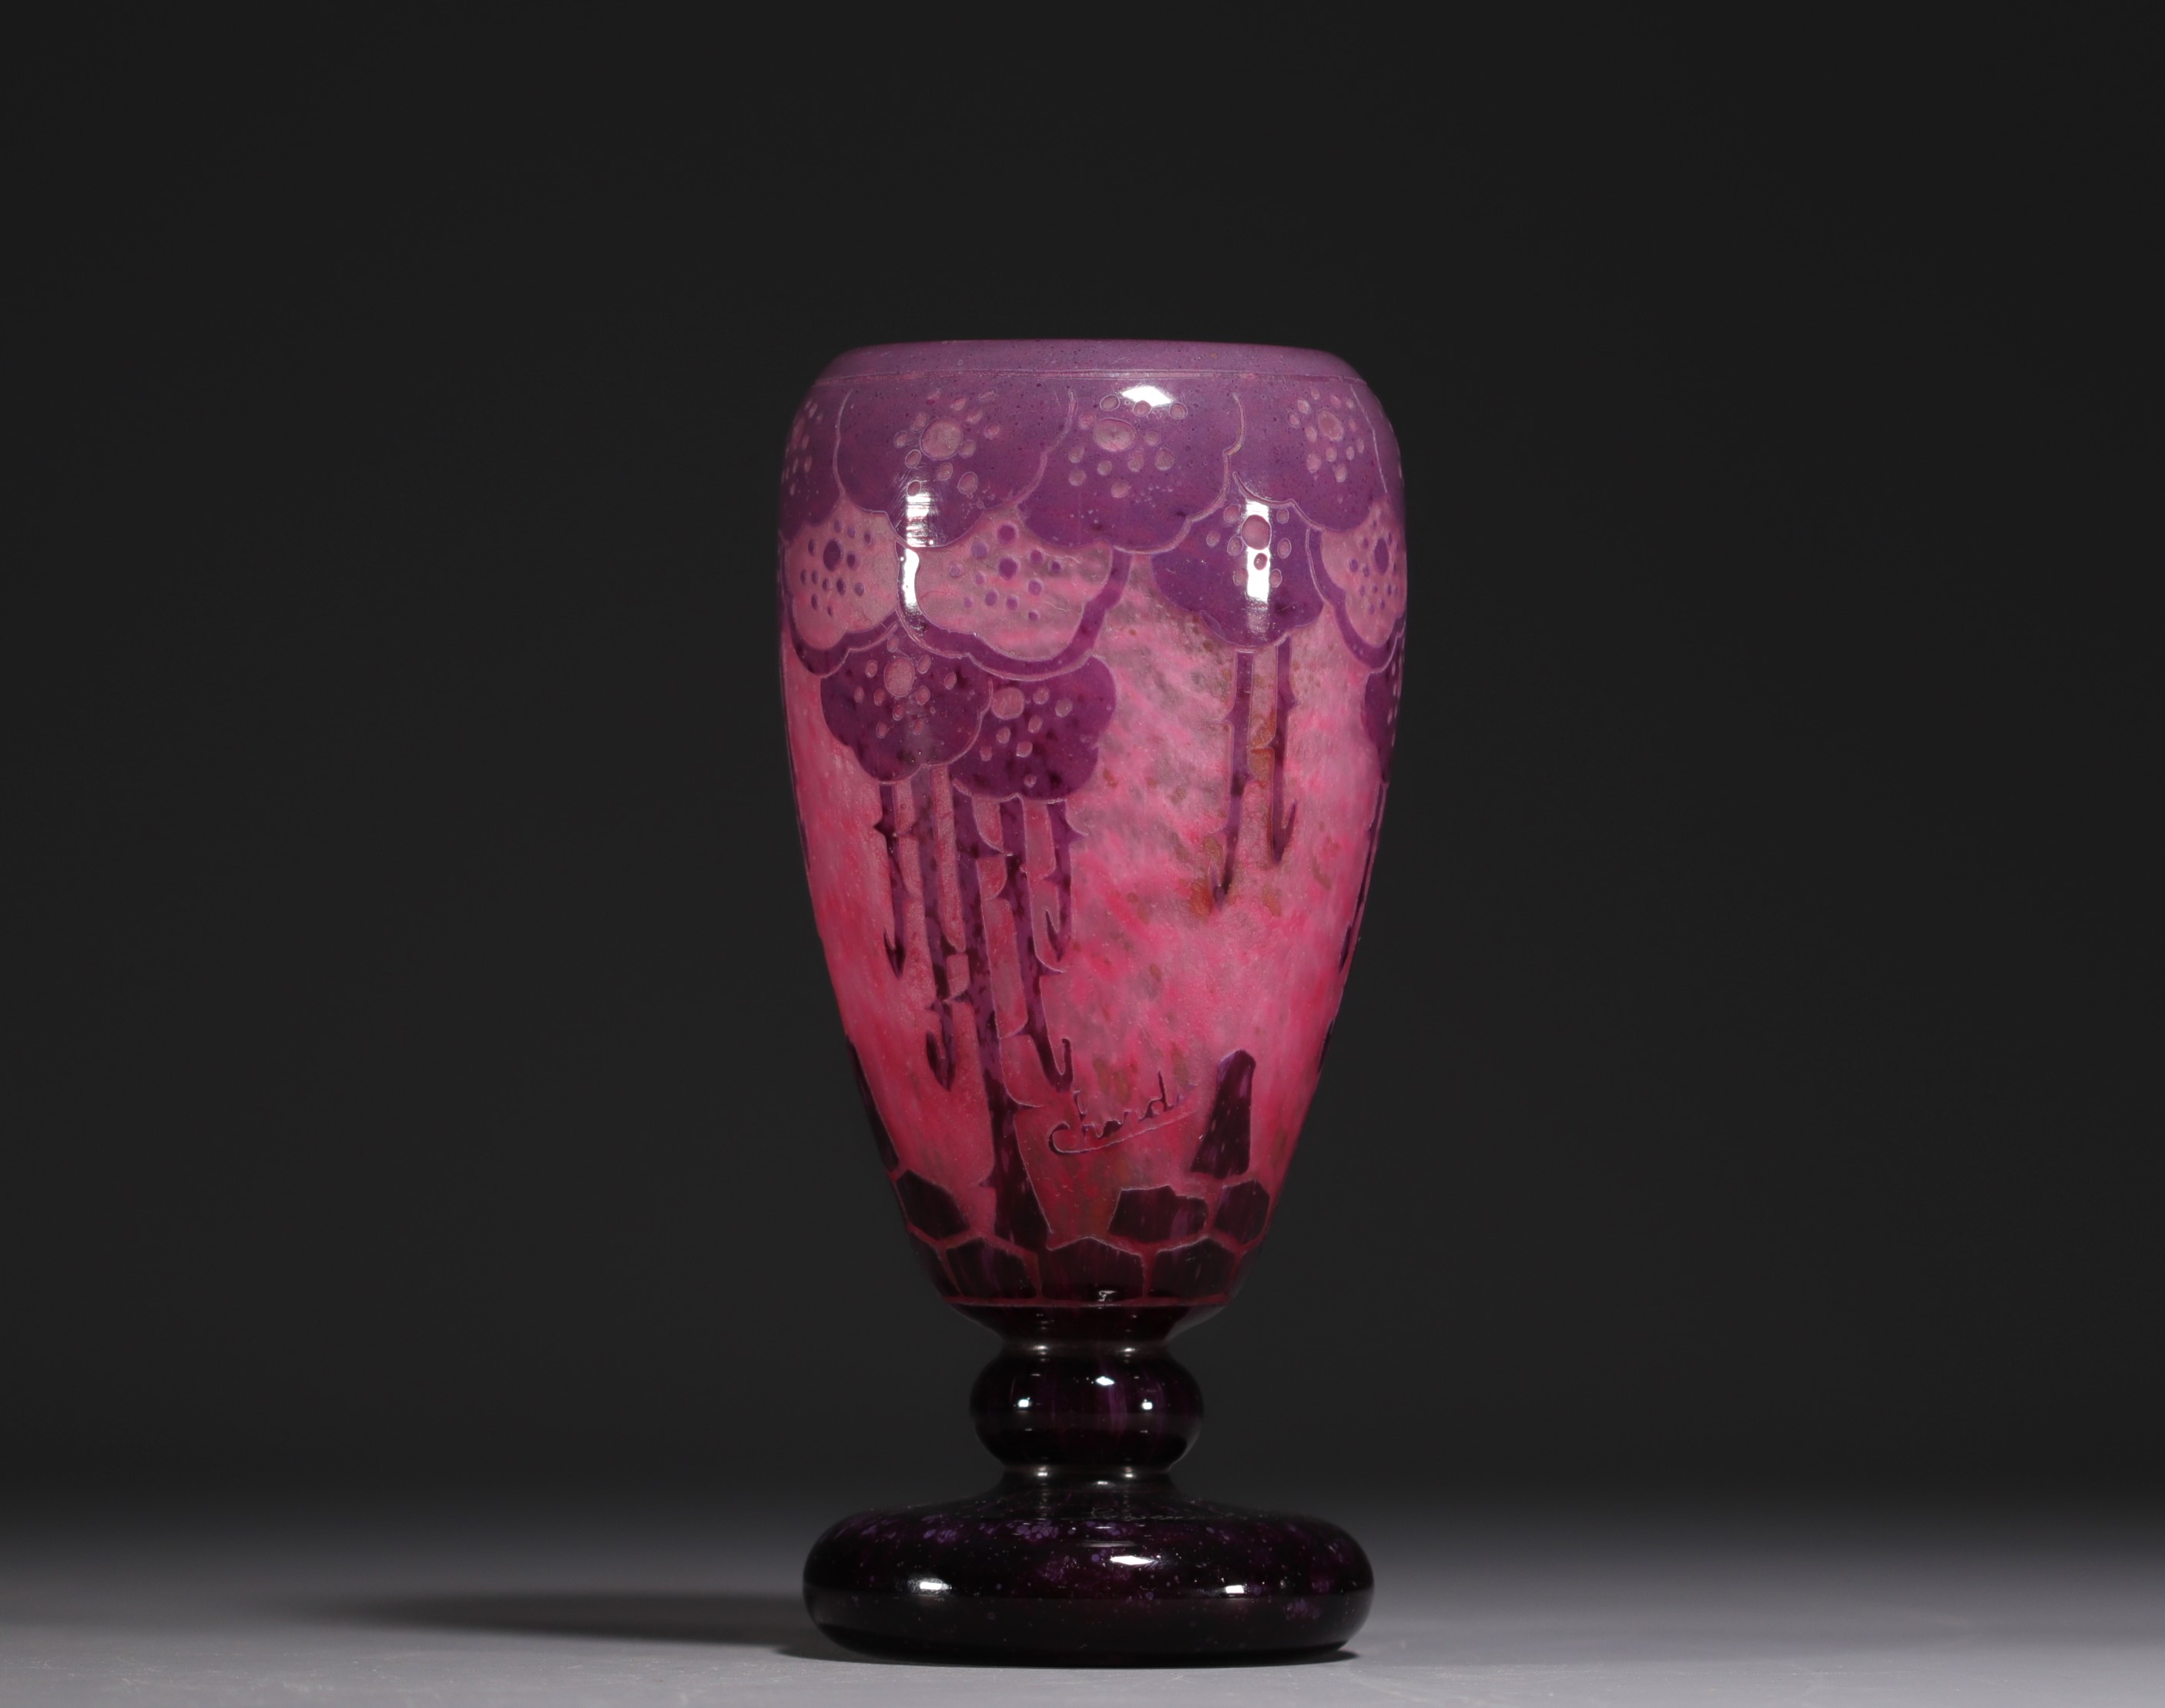 CHARDER - A multi-layered acid-etched glass vase with a rose hip design, signed. - Image 2 of 3